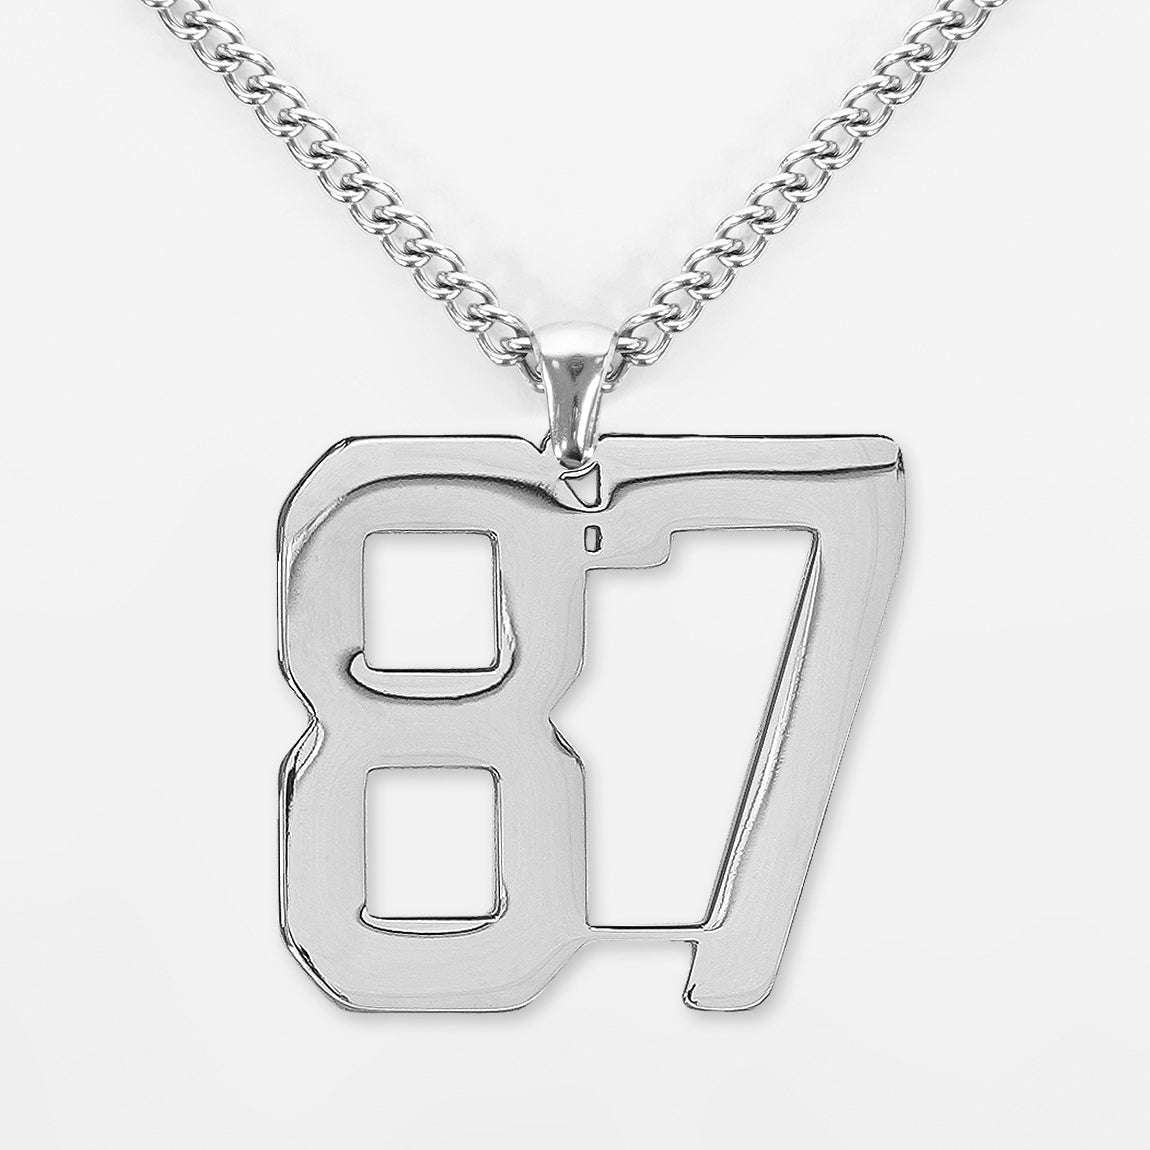 87 Number Pendant with Chain Kids Necklace - Stainless Steel